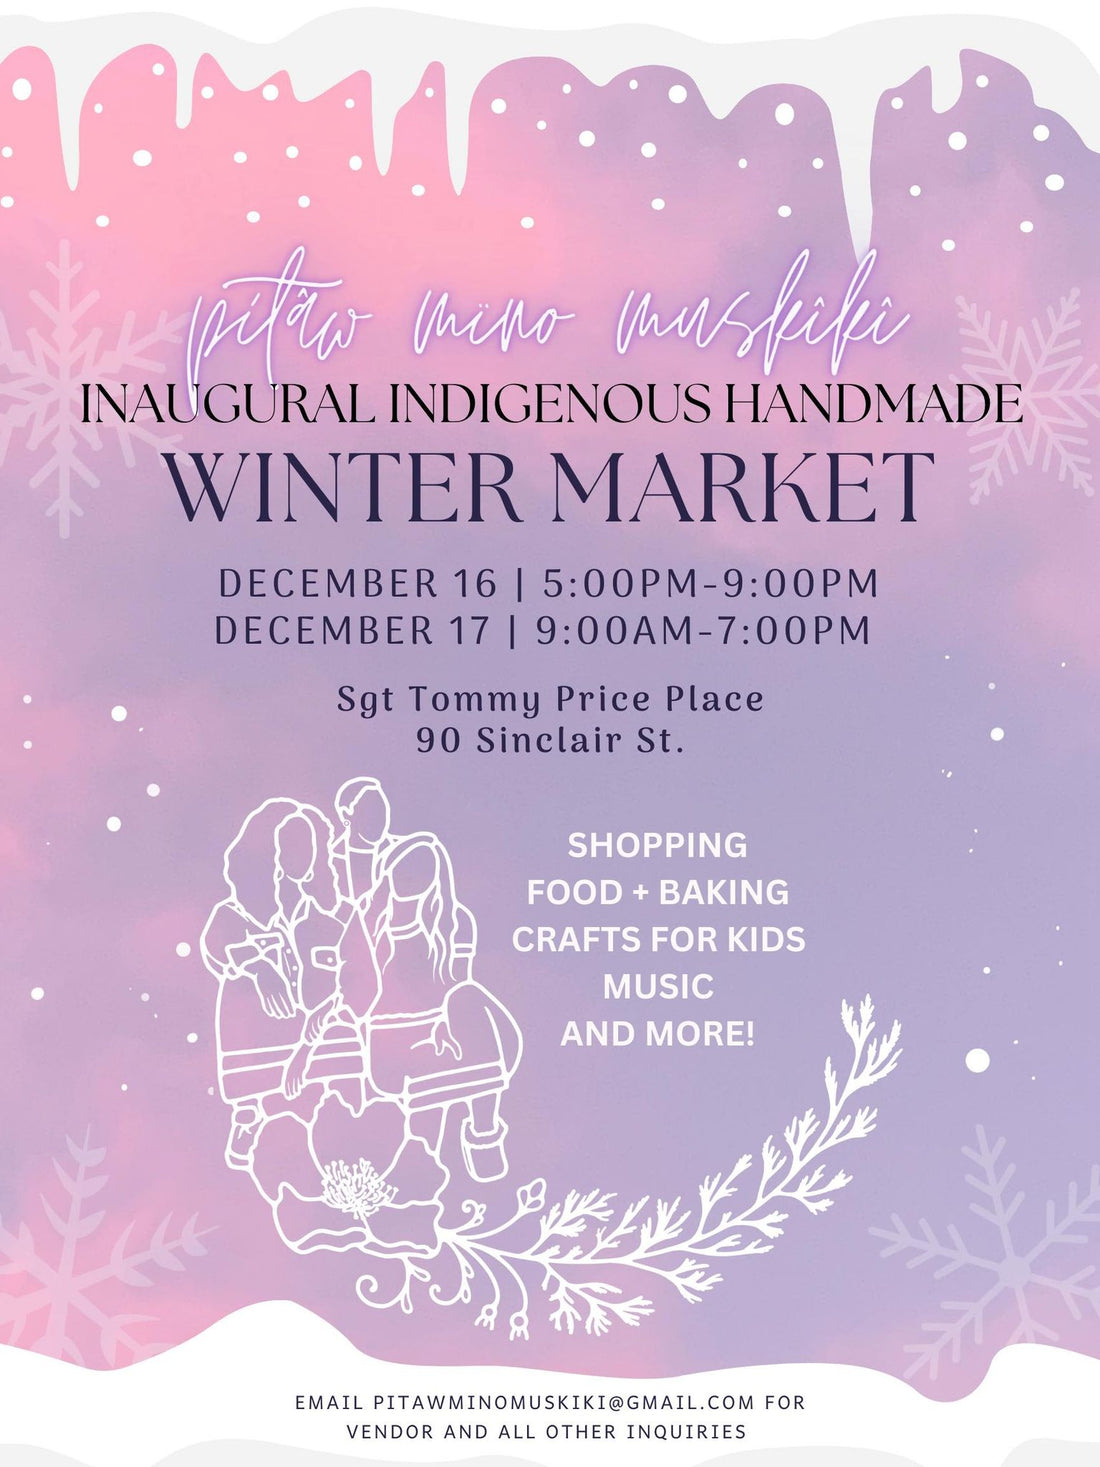 In partnership with 5 Indigenous women makers, Anishinaabe Girl is excited to announce a new Indigenous Handmade Winter Market